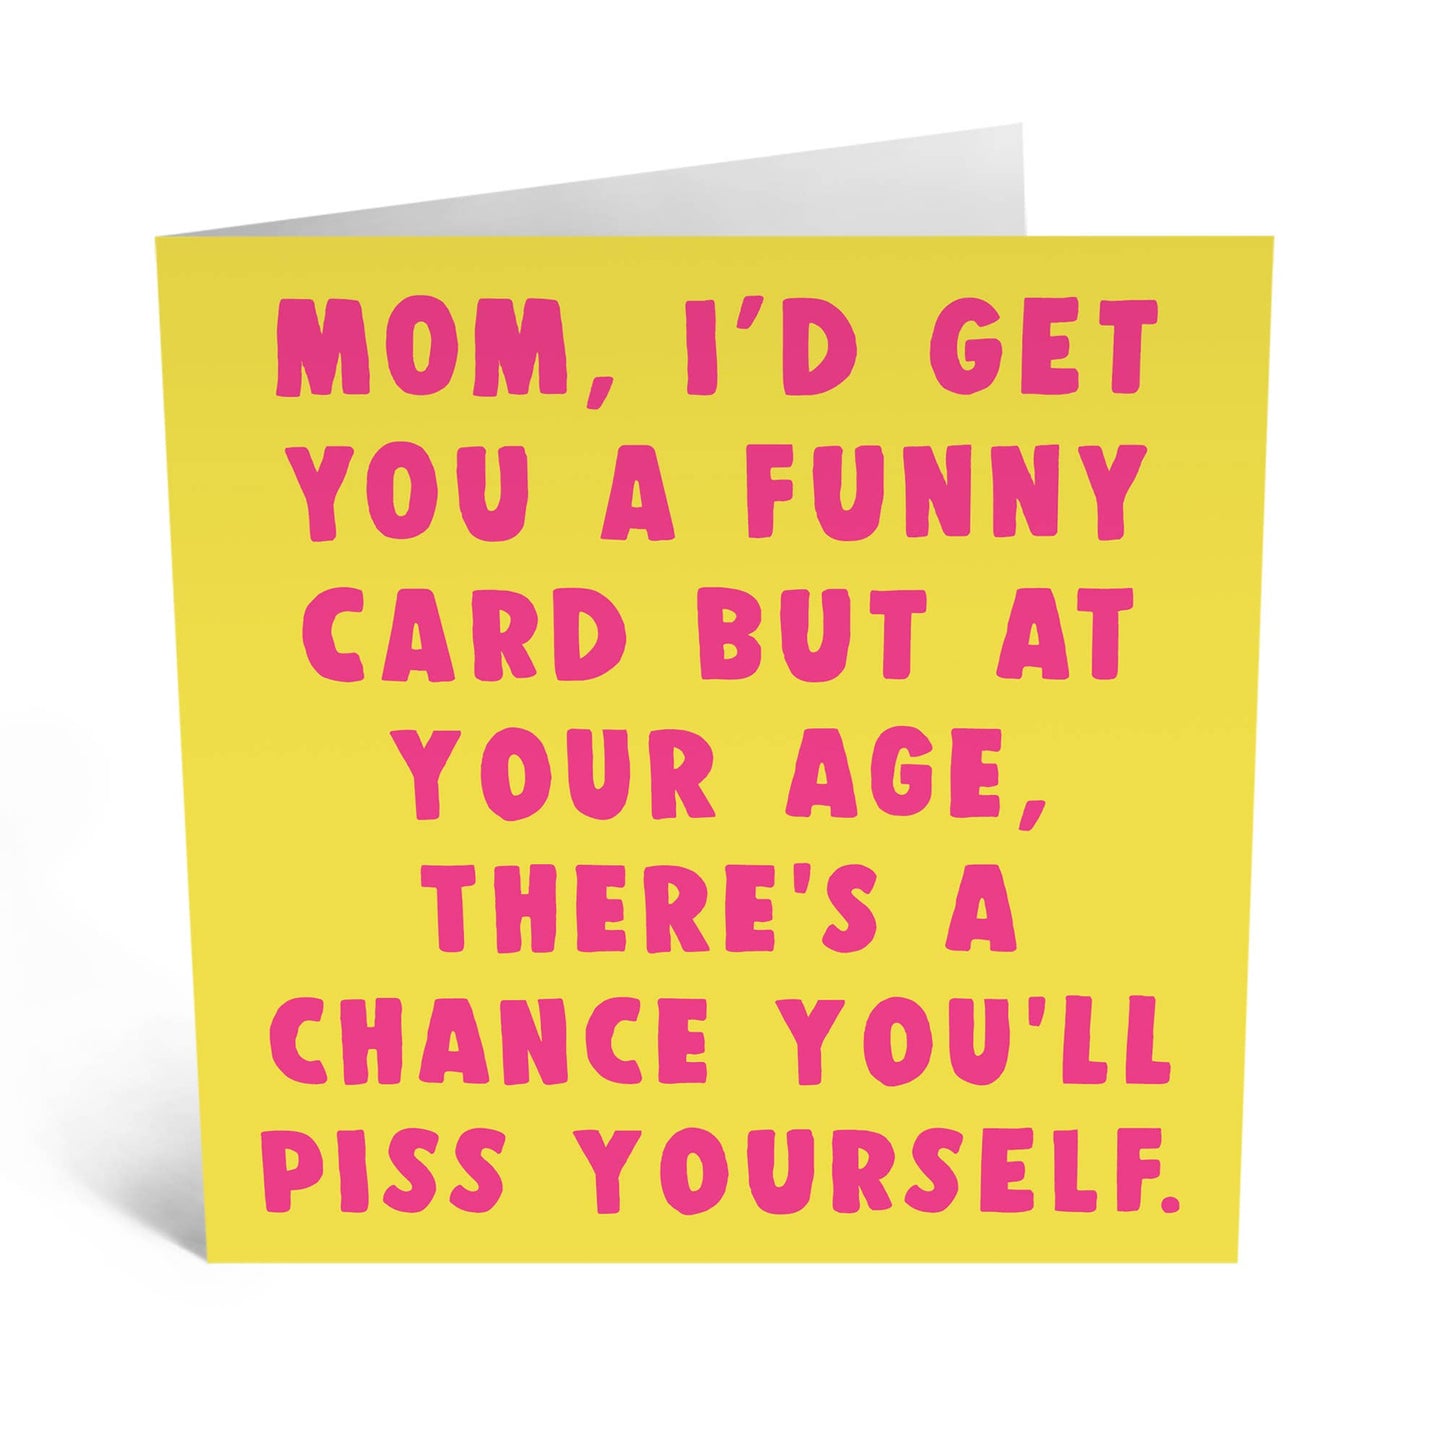 Mom Piss Yourself Card